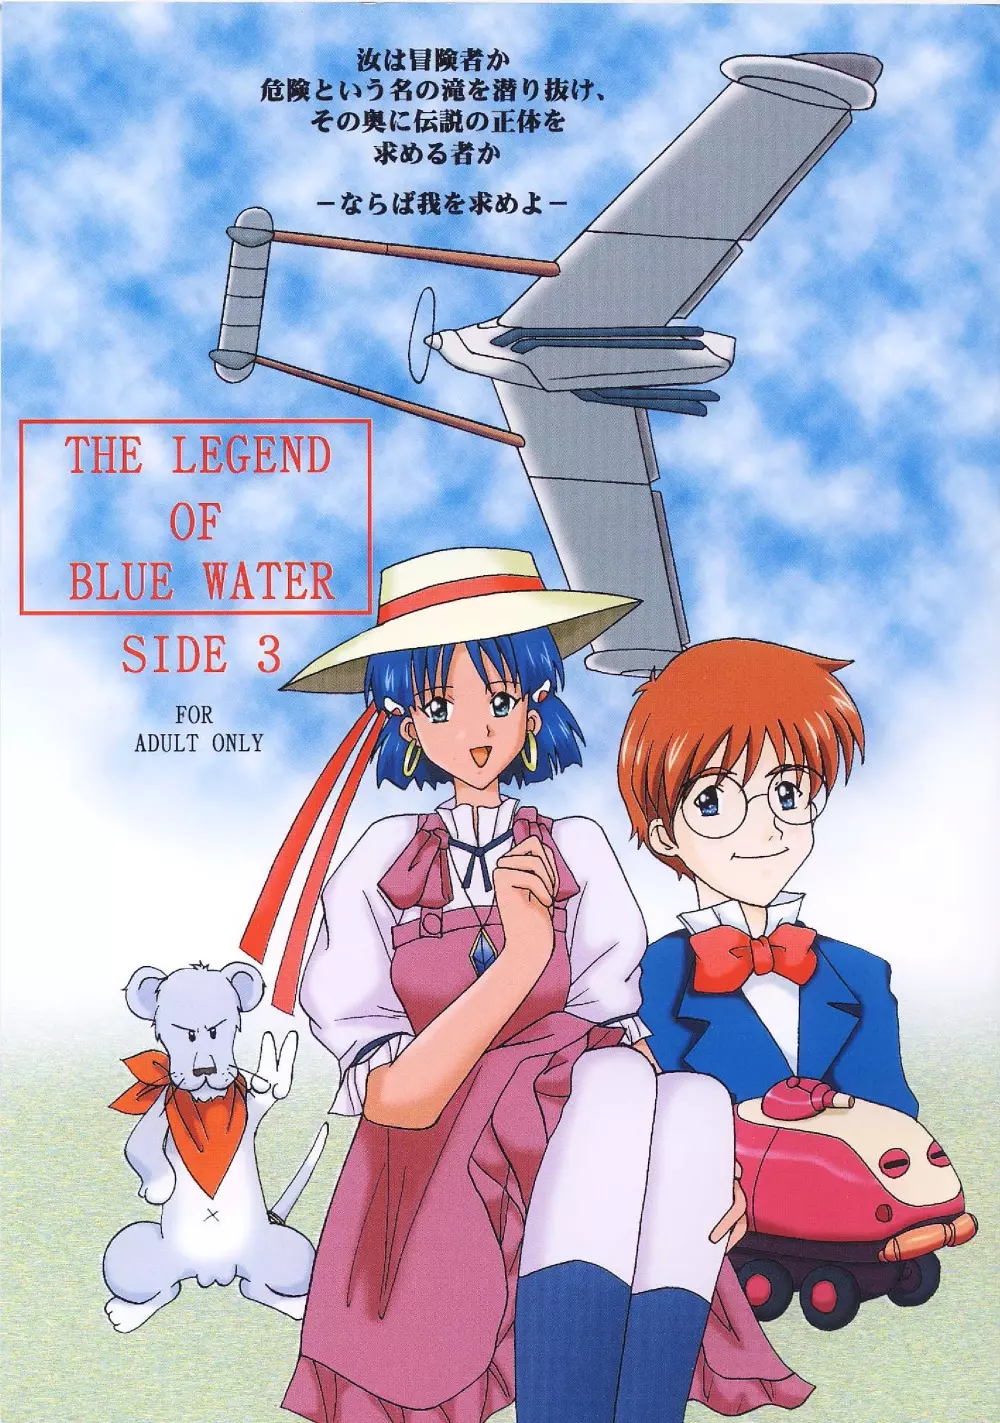 THE LEGEND OF BLUE WATER SIDE 3